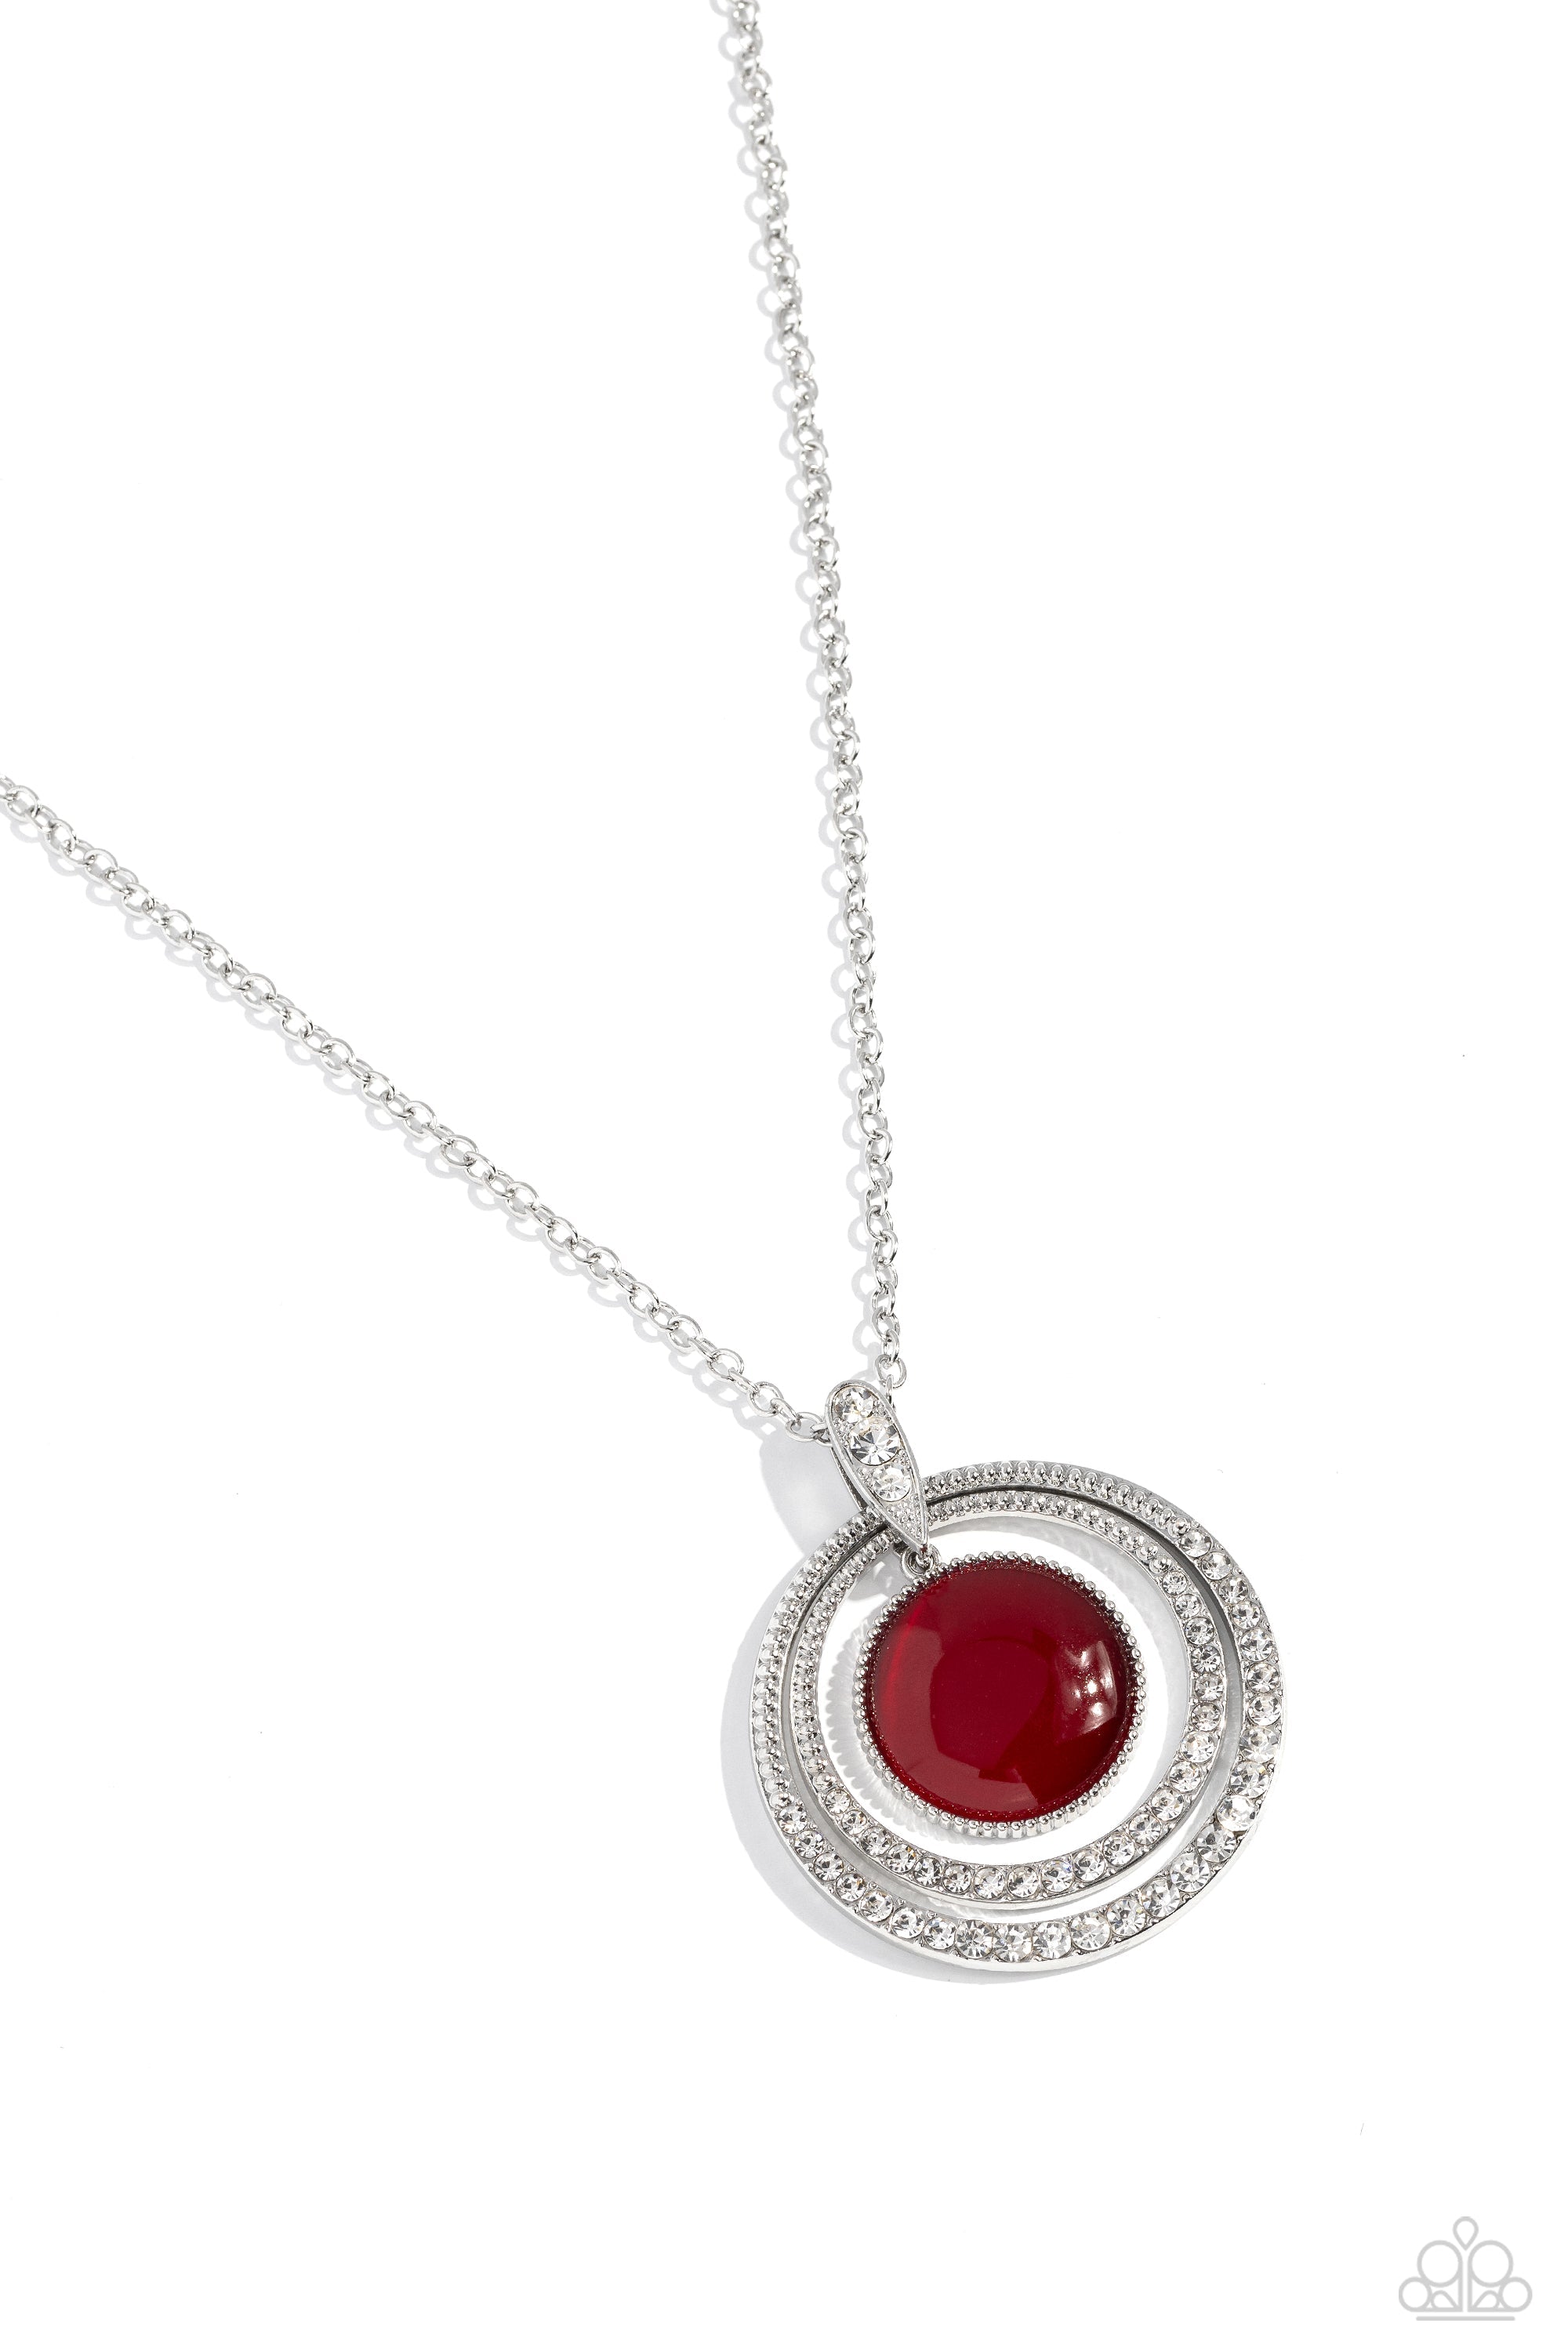 Cats Eye Couture Red Necklace - Paparazzi Accessories- lightbox - CarasShop.com - $5 Jewelry by Cara Jewels